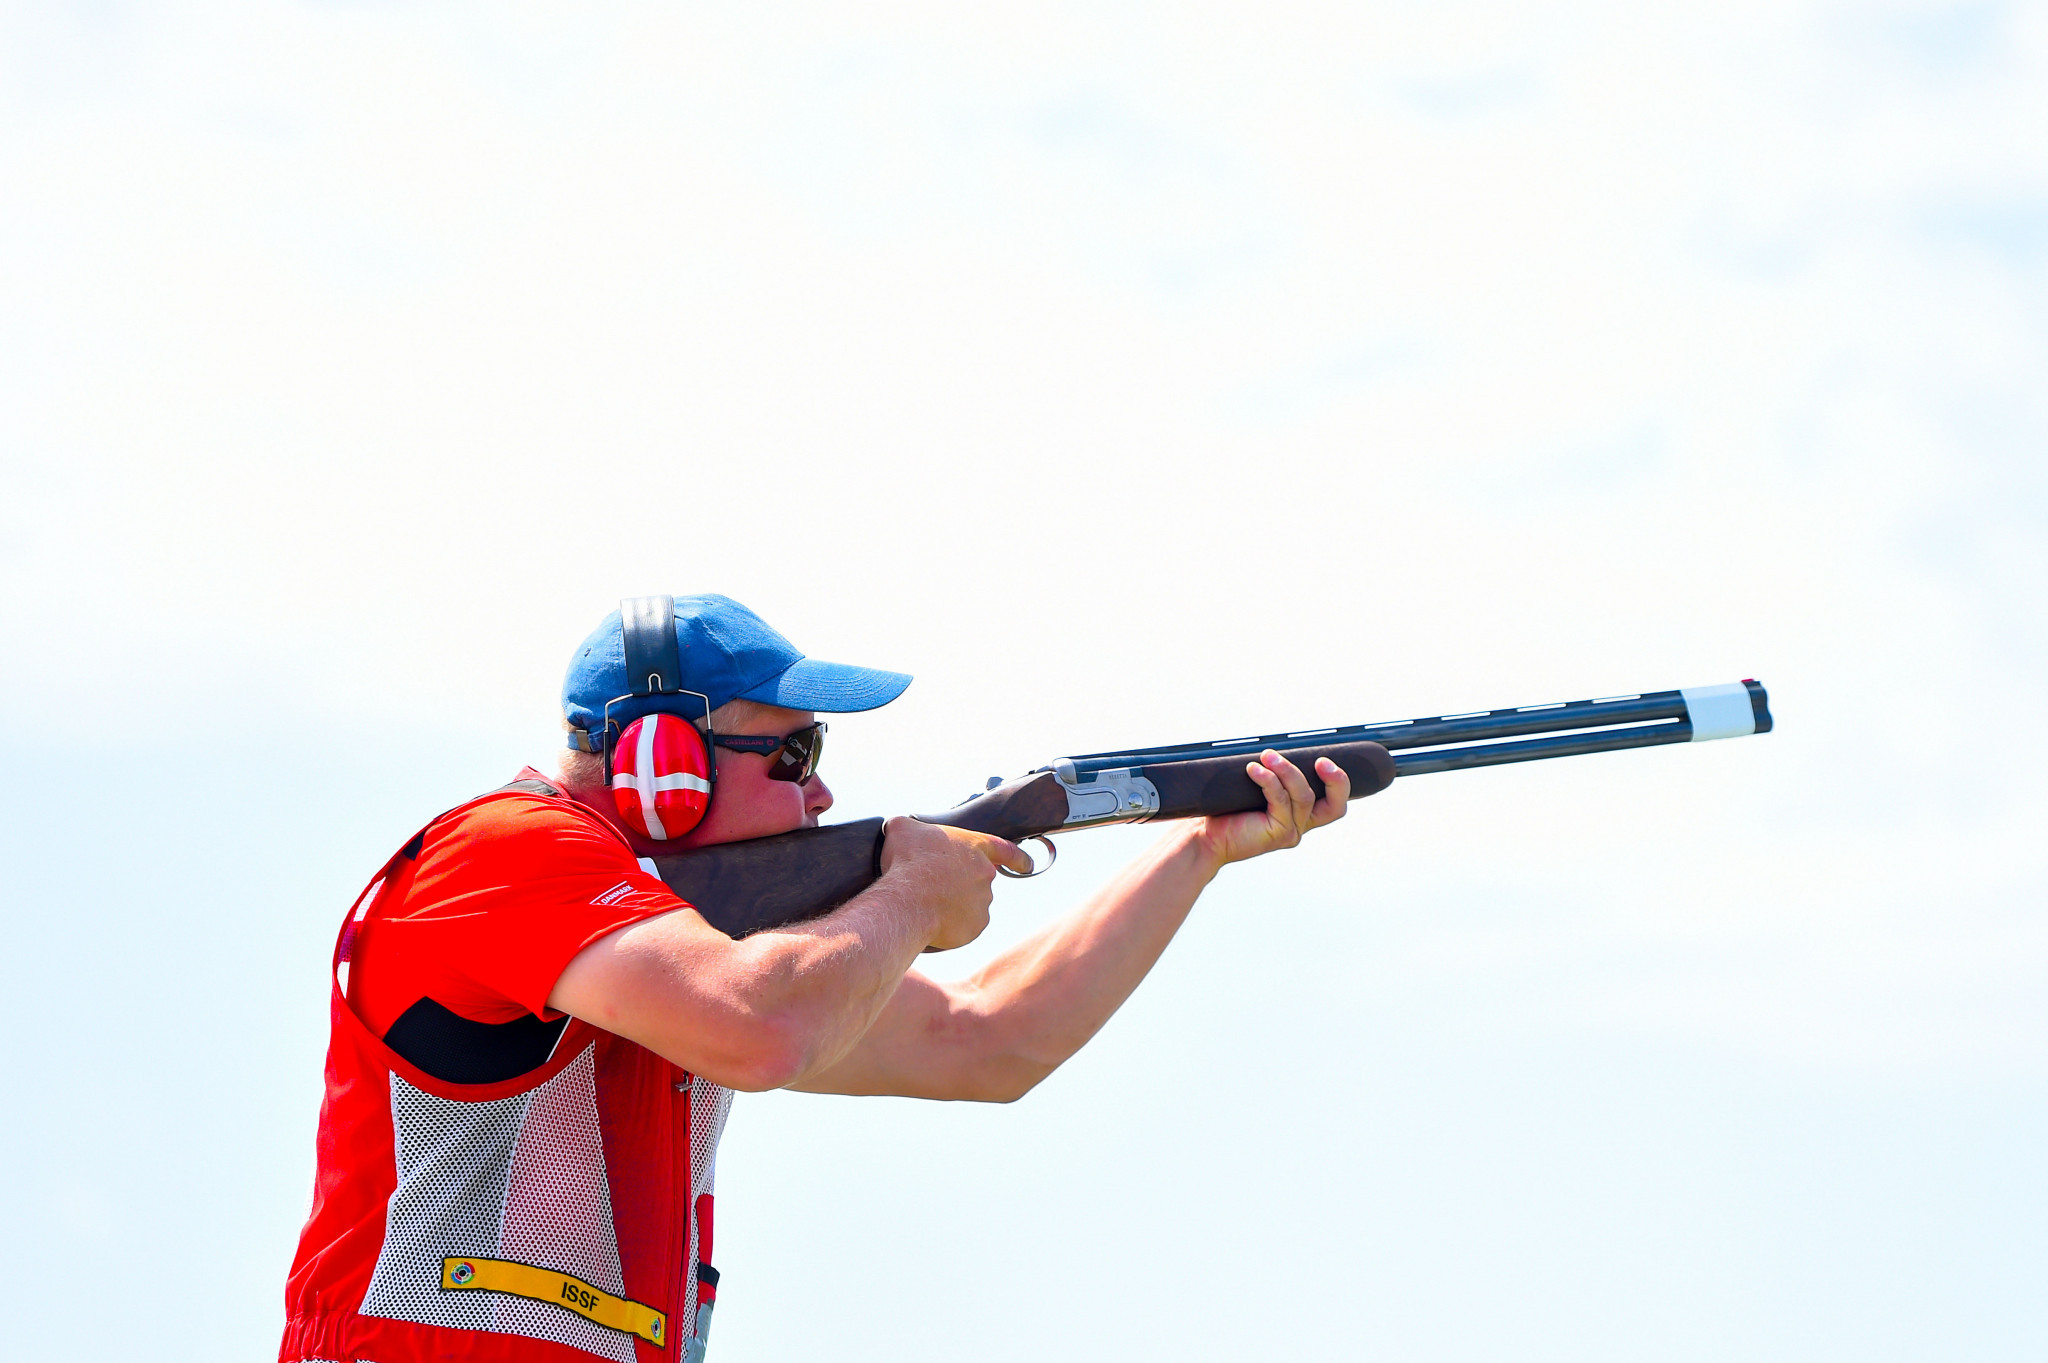 Denmark's Jesper Hansen is one of five shooters tied for the lead in the men's skeet after the first part of qualification ©Getty Images